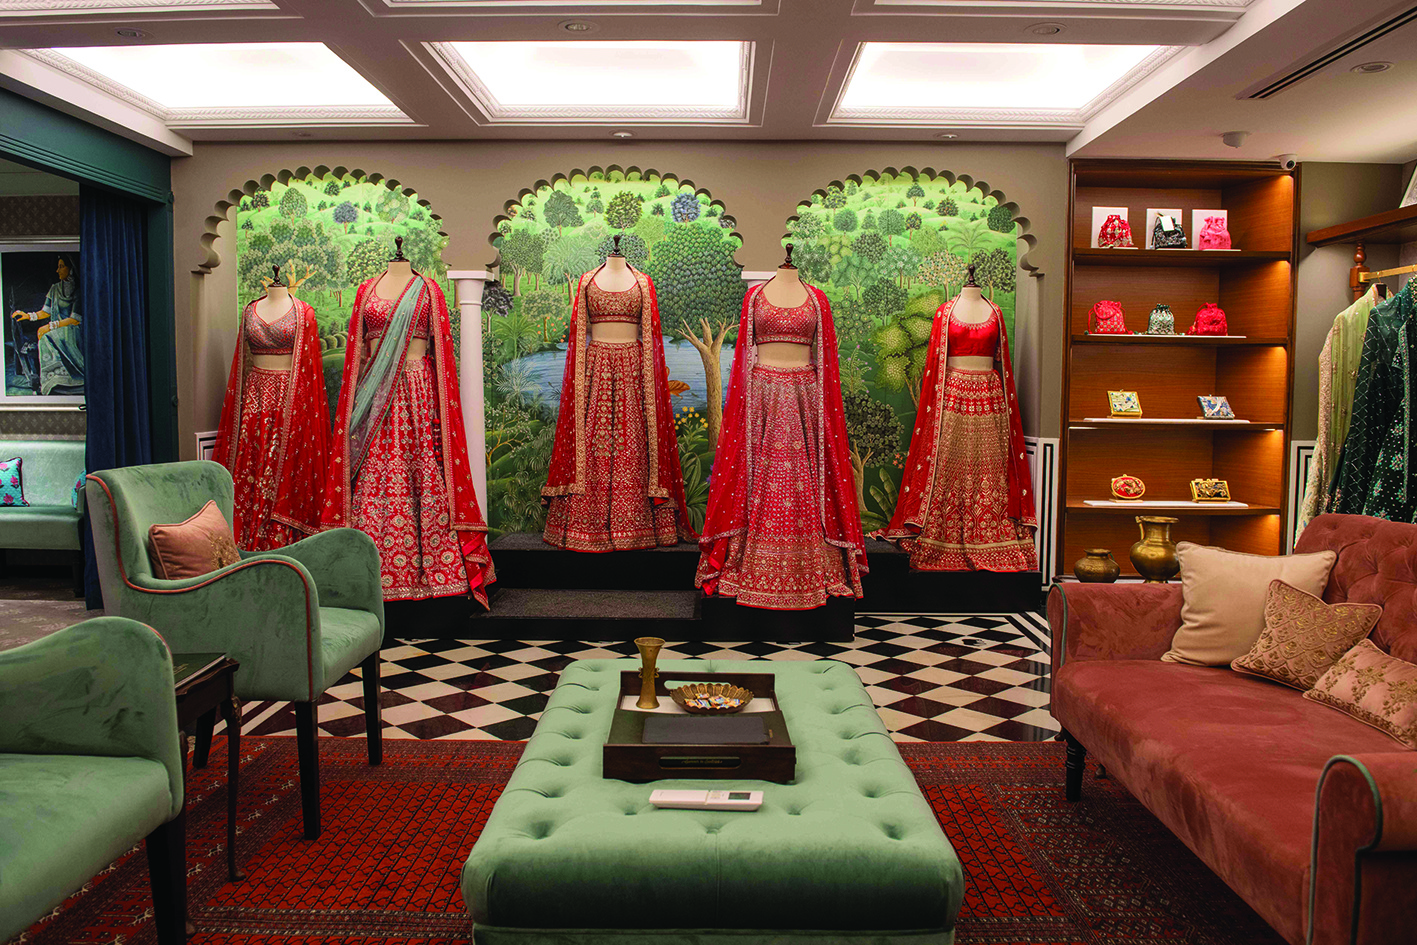 In this photo taken on February 14, 2020, bridal dresses and accessories of fashion designer Anita Dongre are displayed at her store in Mumbai. - With stores in India and New York, multiple clothing brands and a global celebrity following, fashion designer Anita Dongre is a feminist powerhouse in a male-dominated industry. But her true ambition is to create an environmentally sustainable company, she says. (Photo by LaurËne Becquart / AFP) / TO GO WITH Women-activism-India-fashion-economy-environment,INTERVIEW by Ammu Kannampilly